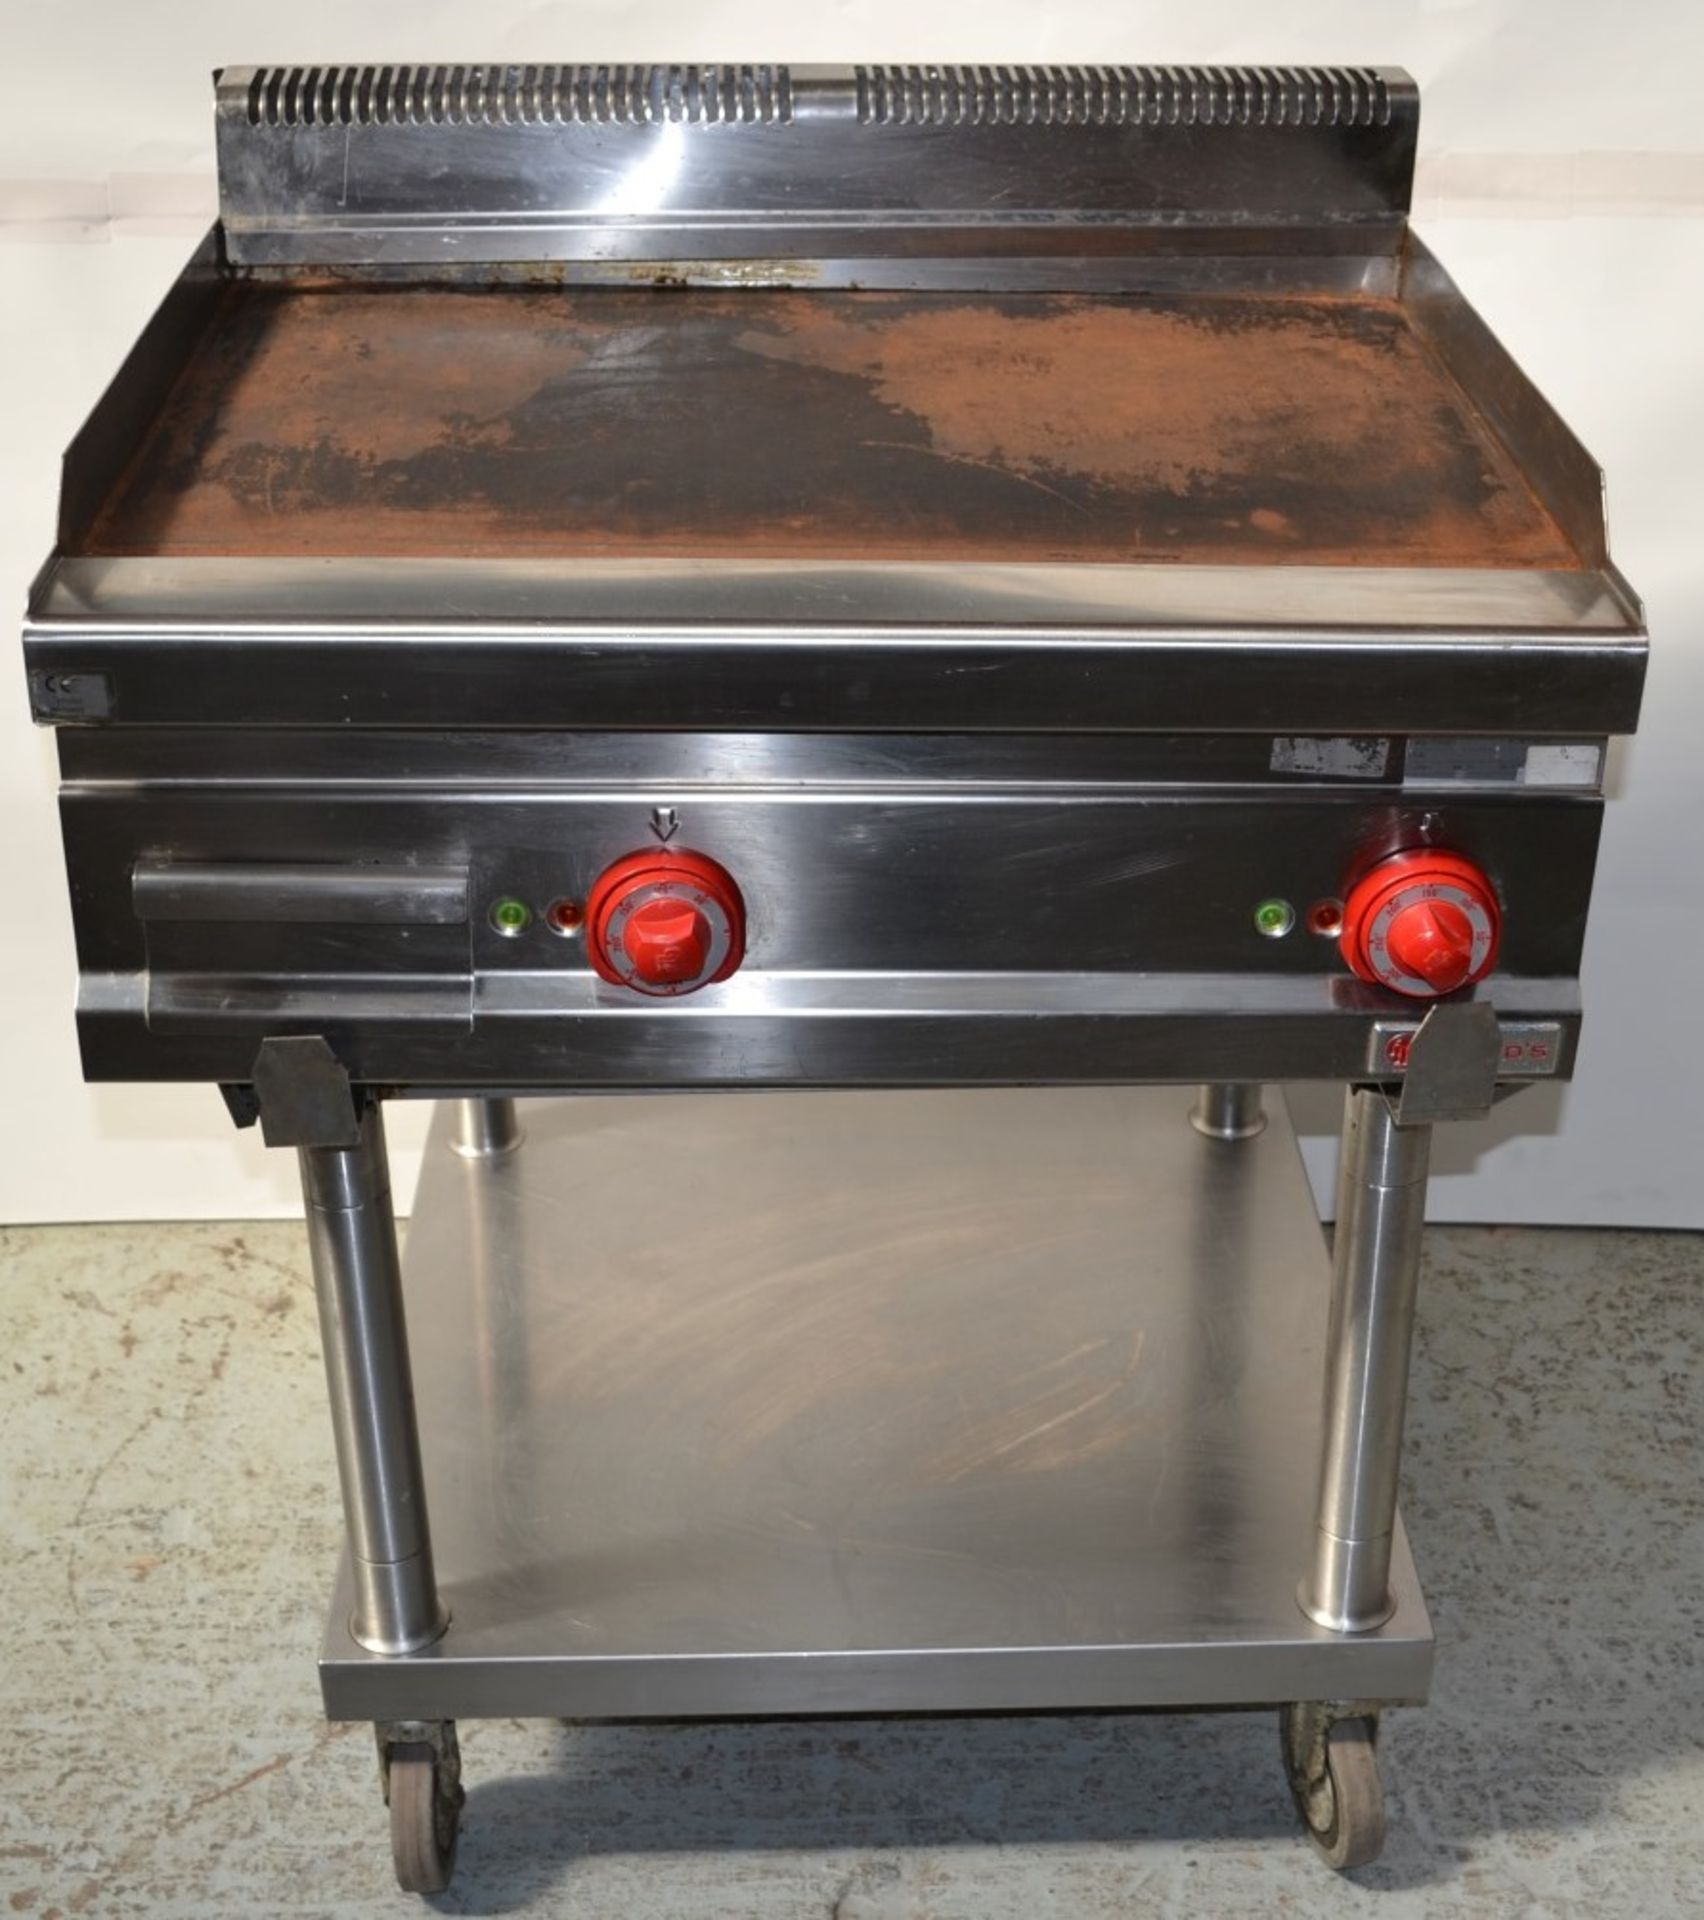 1 x Bertos Stainless Steel Electric Flat Surface Griddle (Model: E7FL8B-2) - Also Includes A Stand - - Image 5 of 6